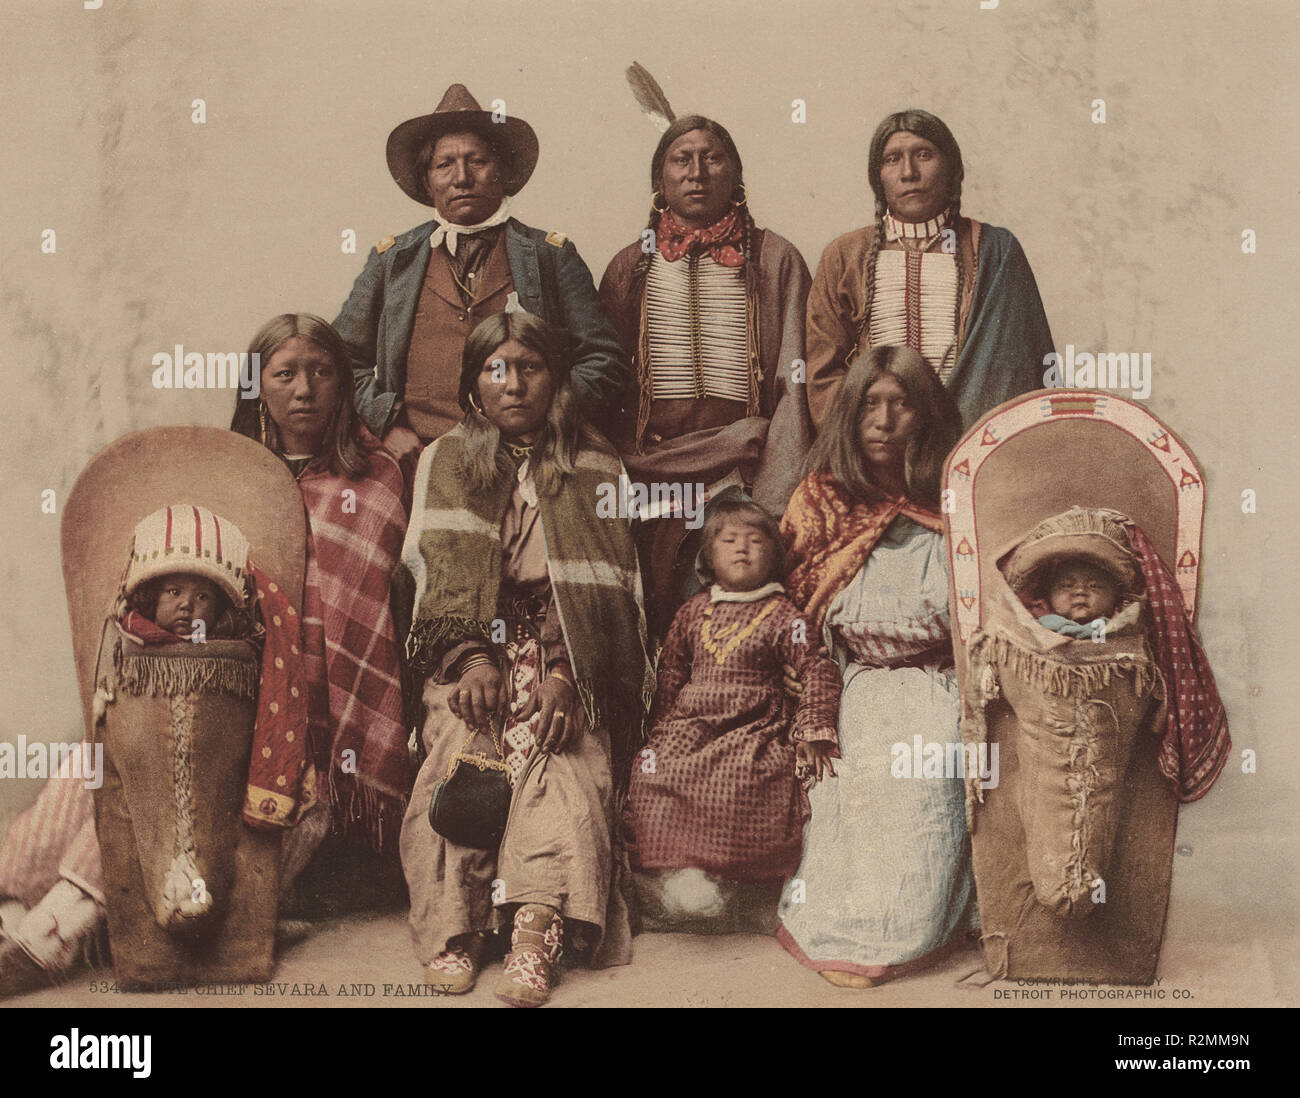 Ute Chief Sevara and Family. Dated: 1899. Dimensions: image: 6 15/16 x 9 in. (17.6 x 22.9 cm). Medium: photochrom. Museum: National Gallery of Art, Washington DC. Author: American 19th Century (Detroit Photographic Co. ). Stock Photo